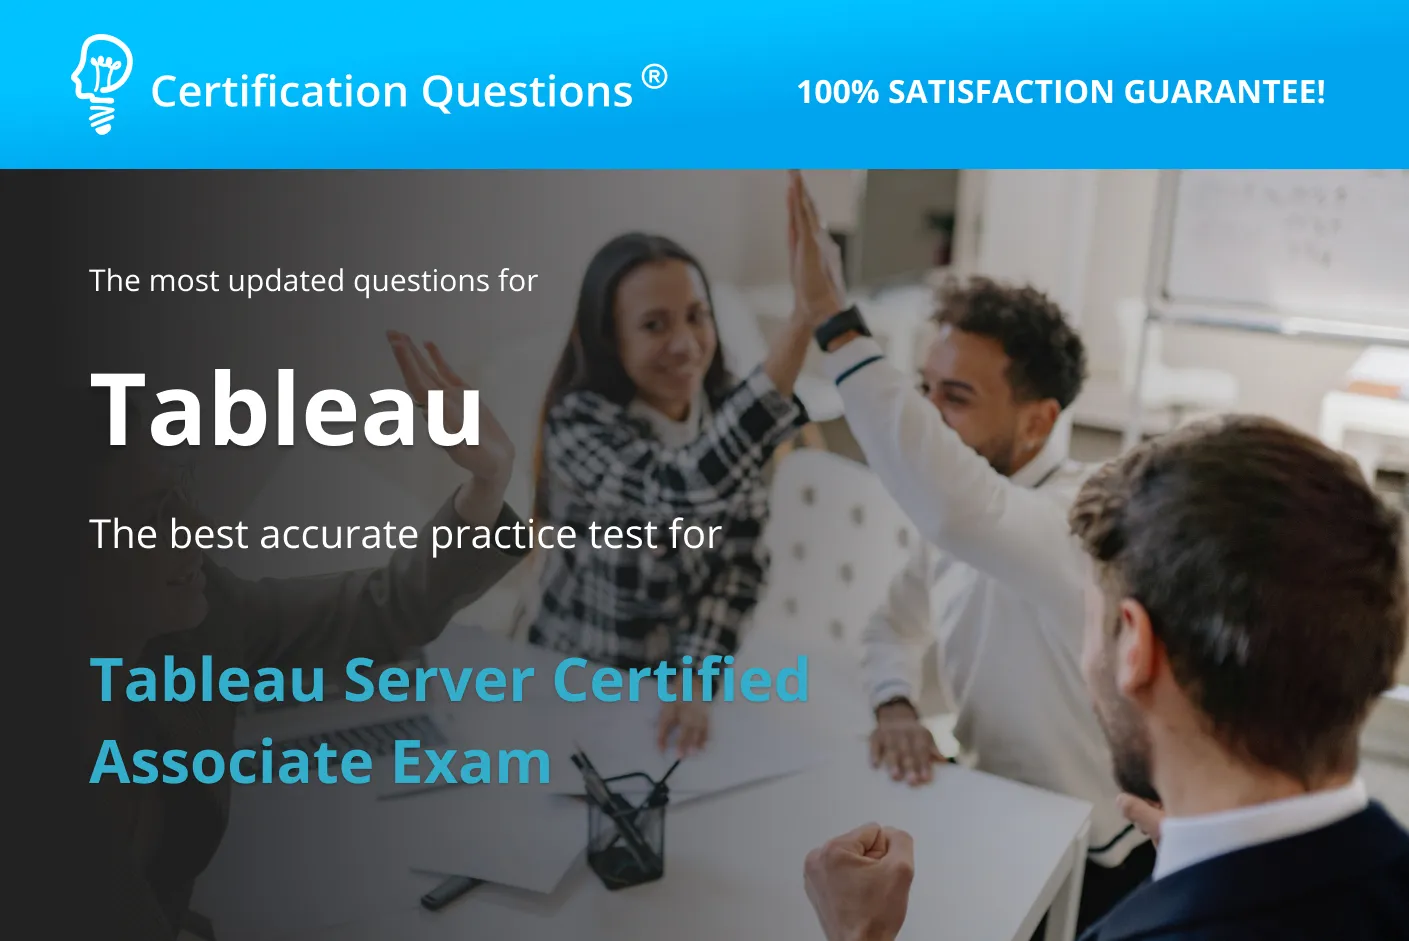 Here is the image for the study guide of the tableau server certified associate practice test